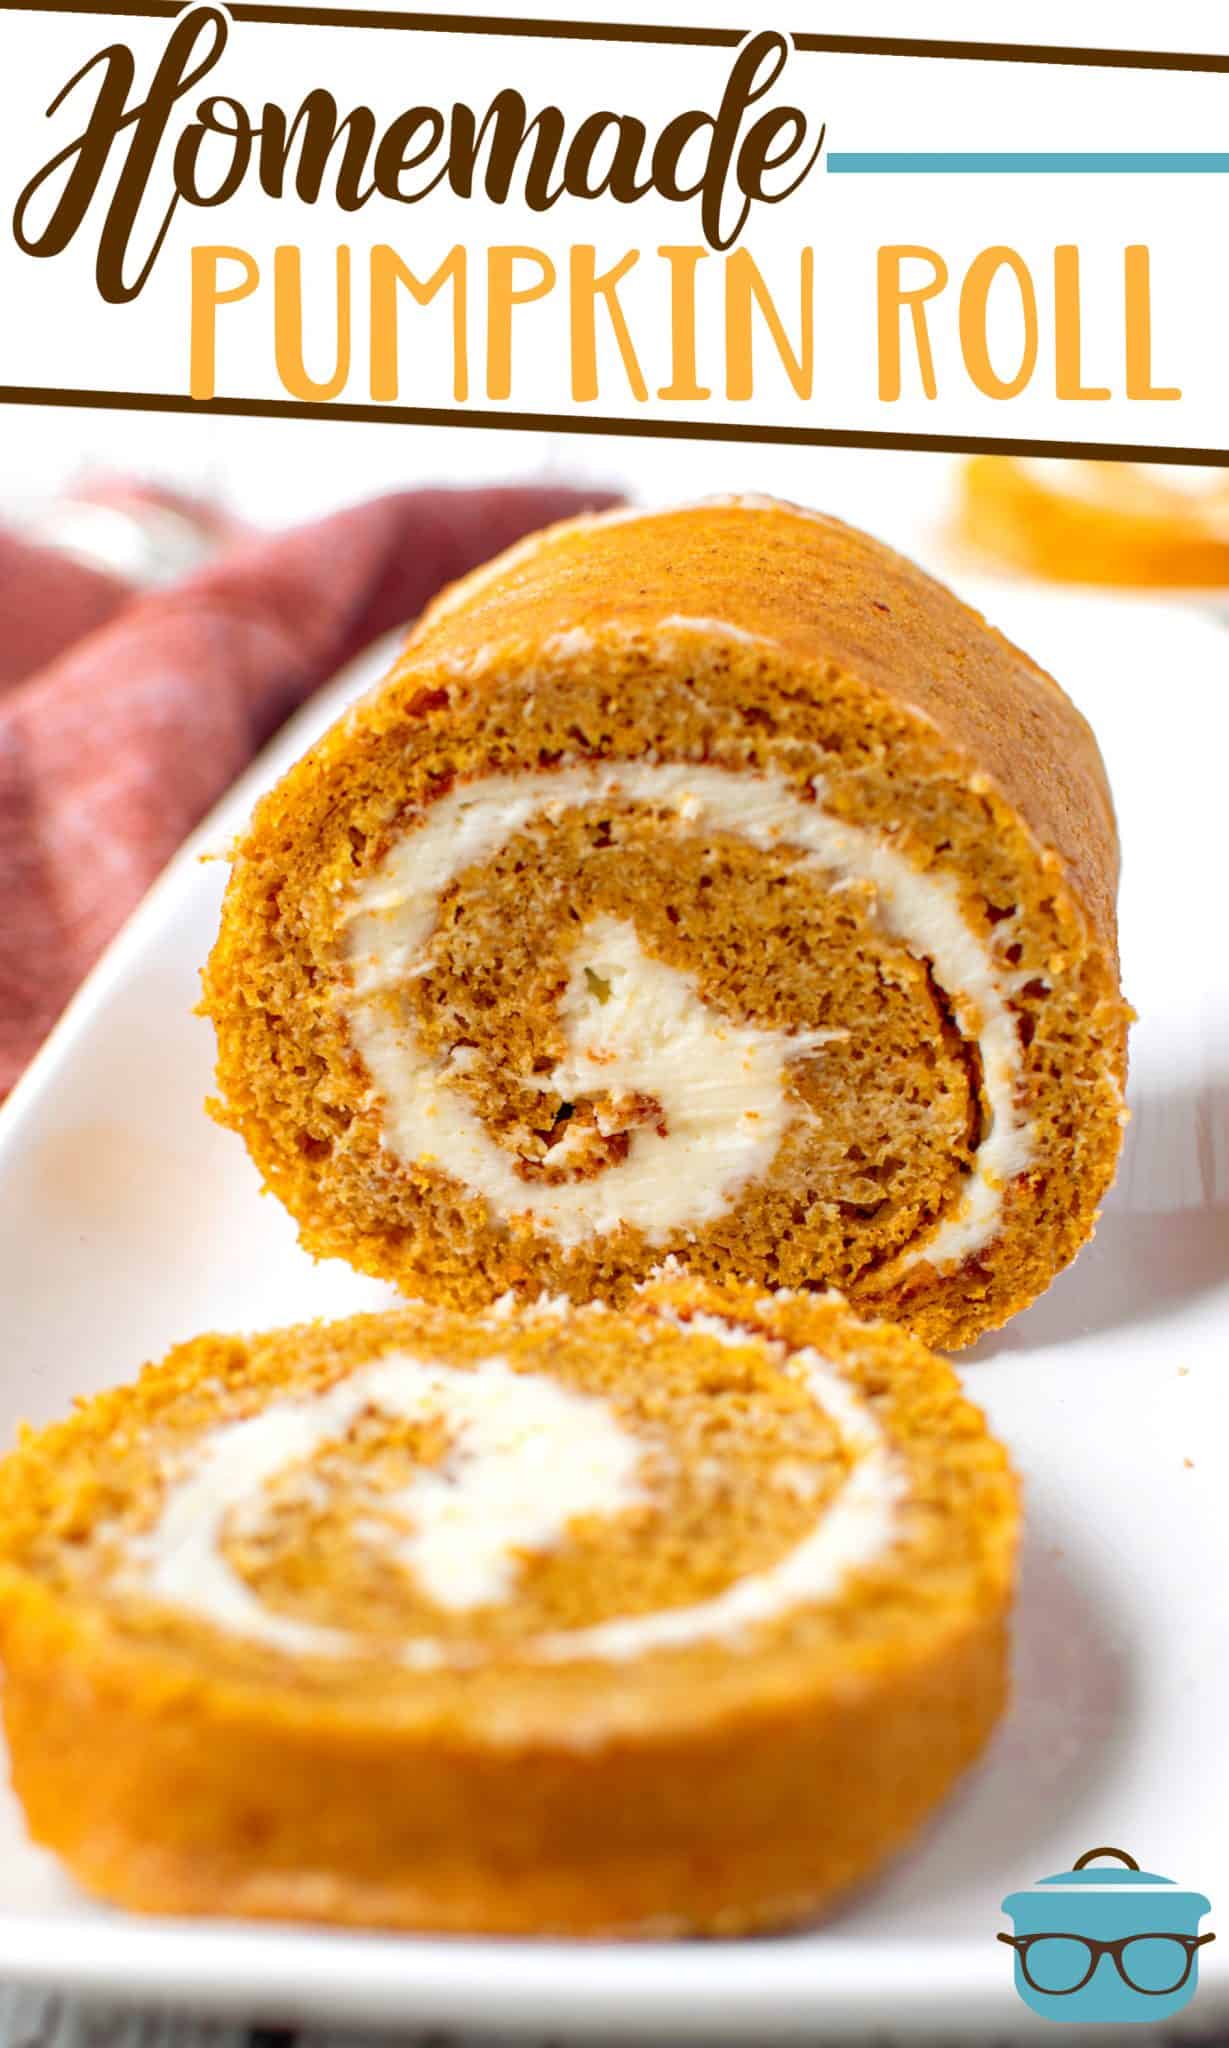 Homemade Pumpkin Roll by The Country Cook - WEEKEND POTLUCK 454